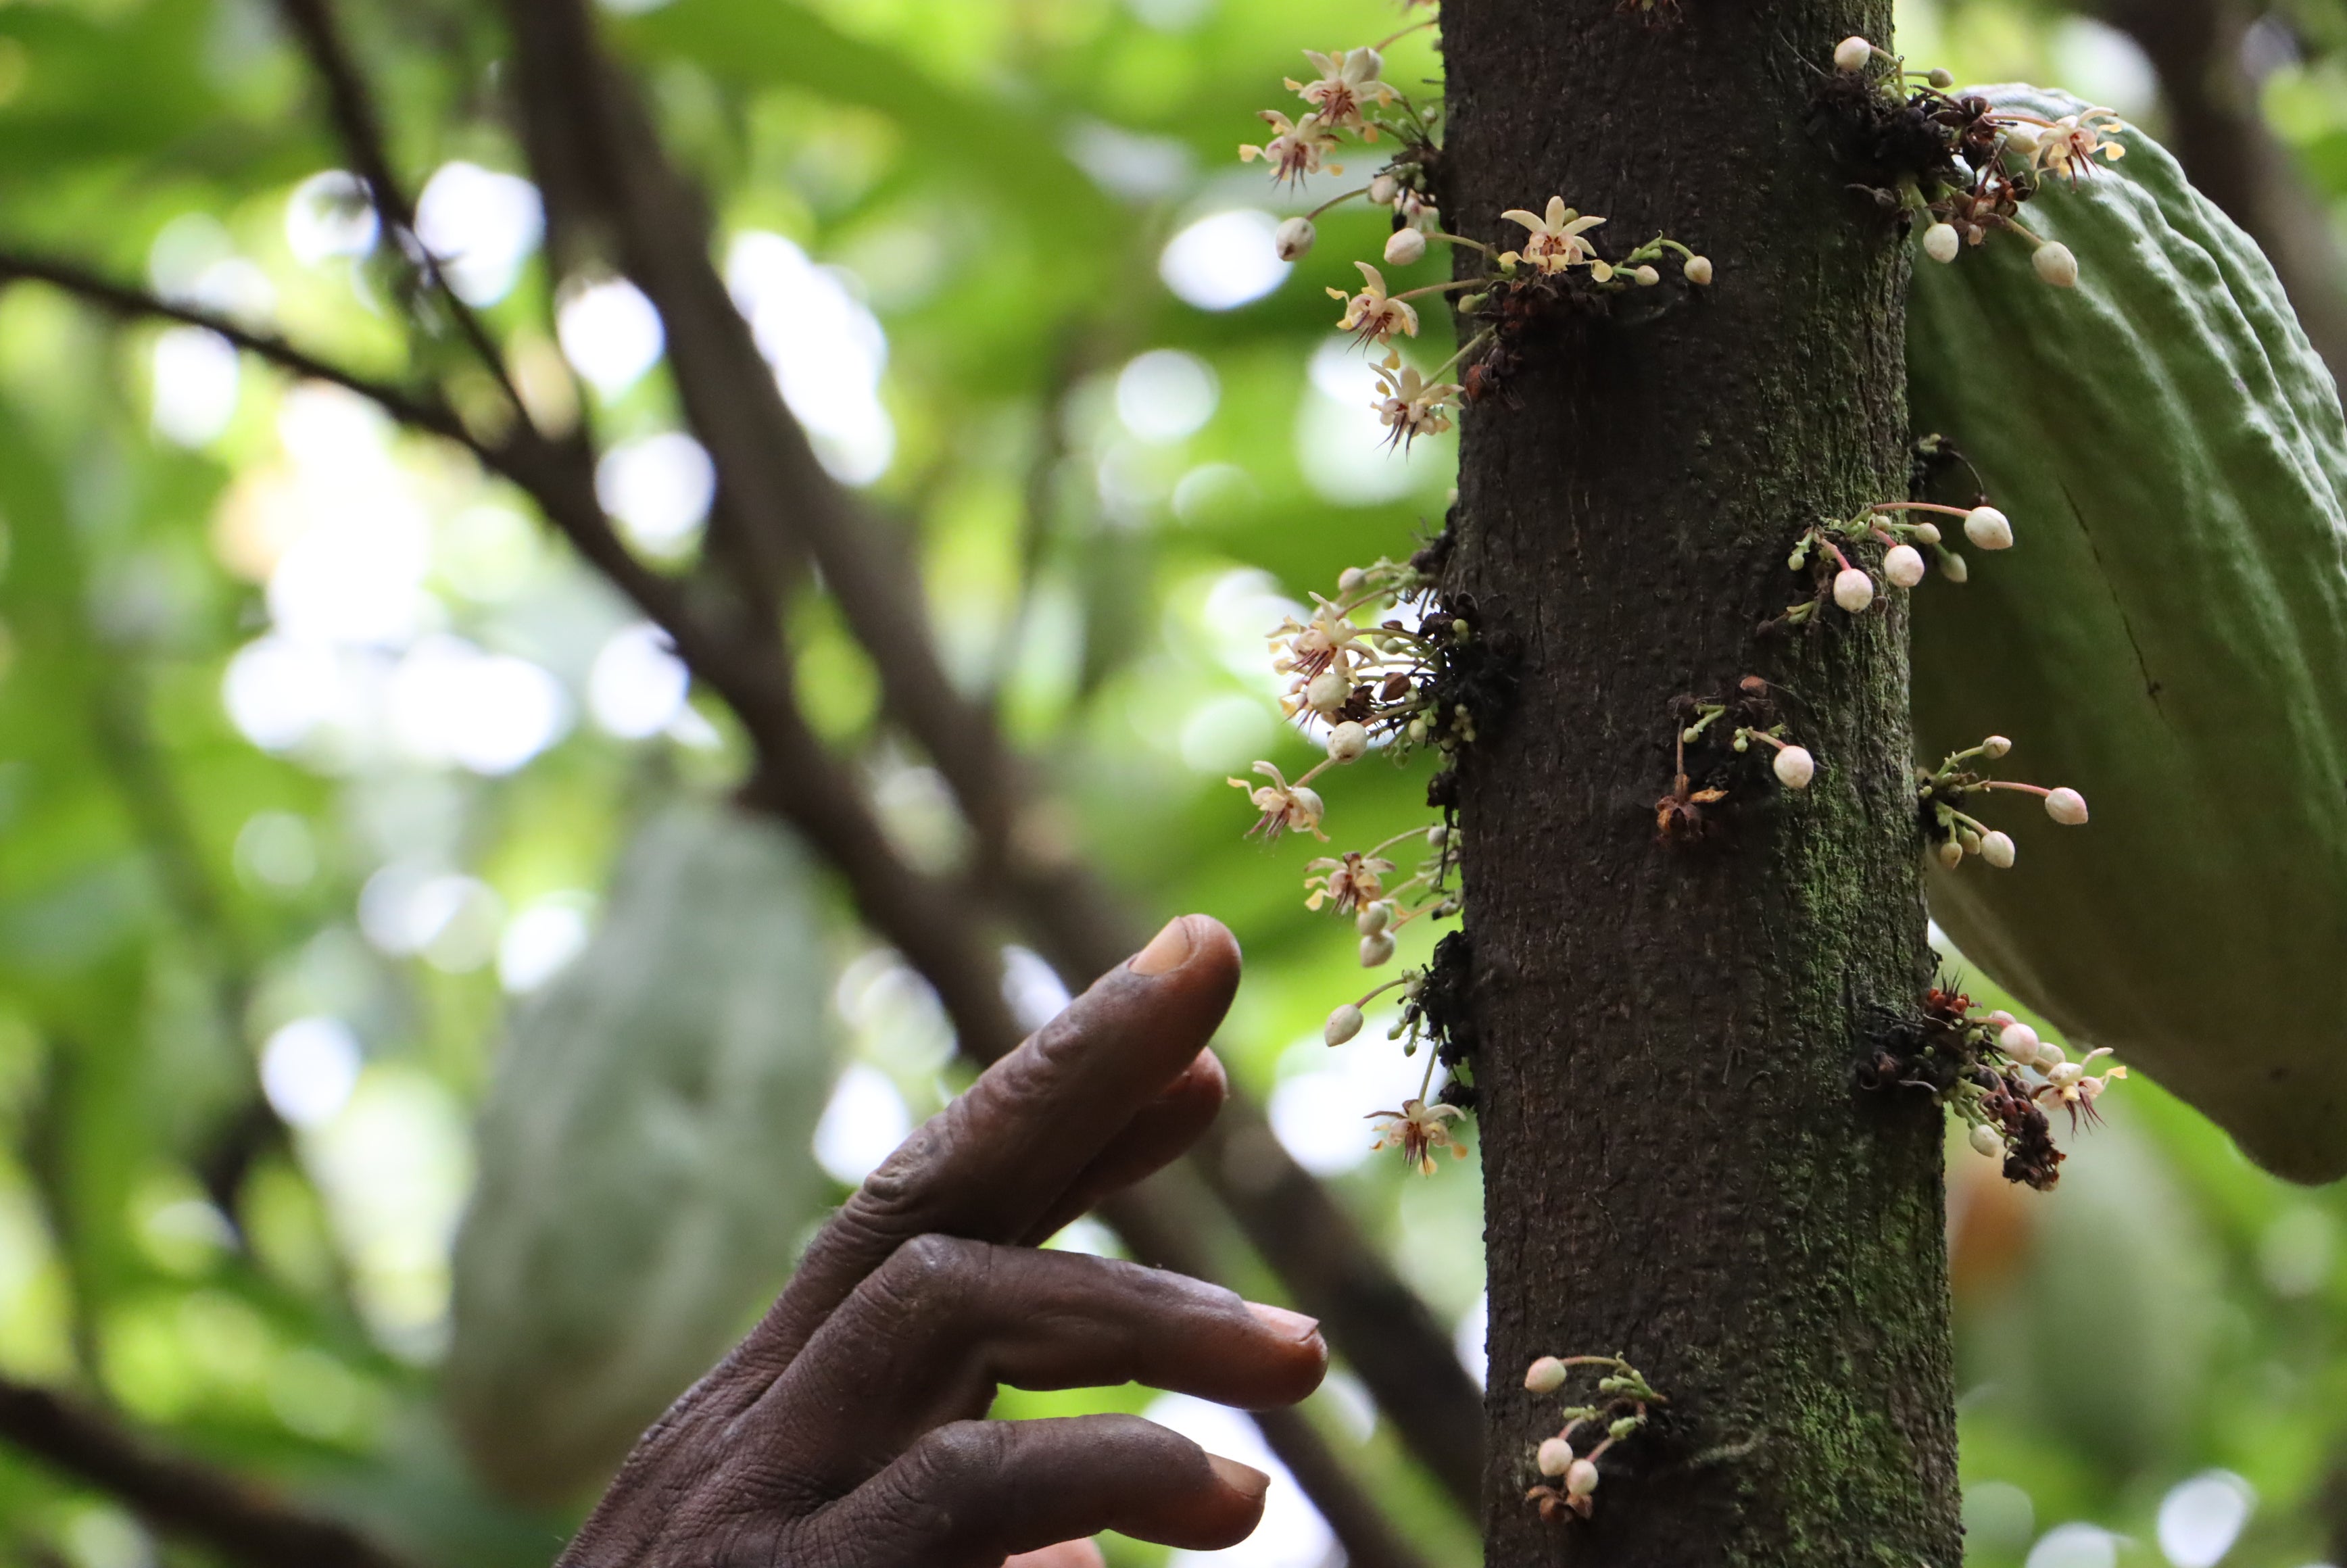 Hand pollination is a technique used to increase cocoa yields.